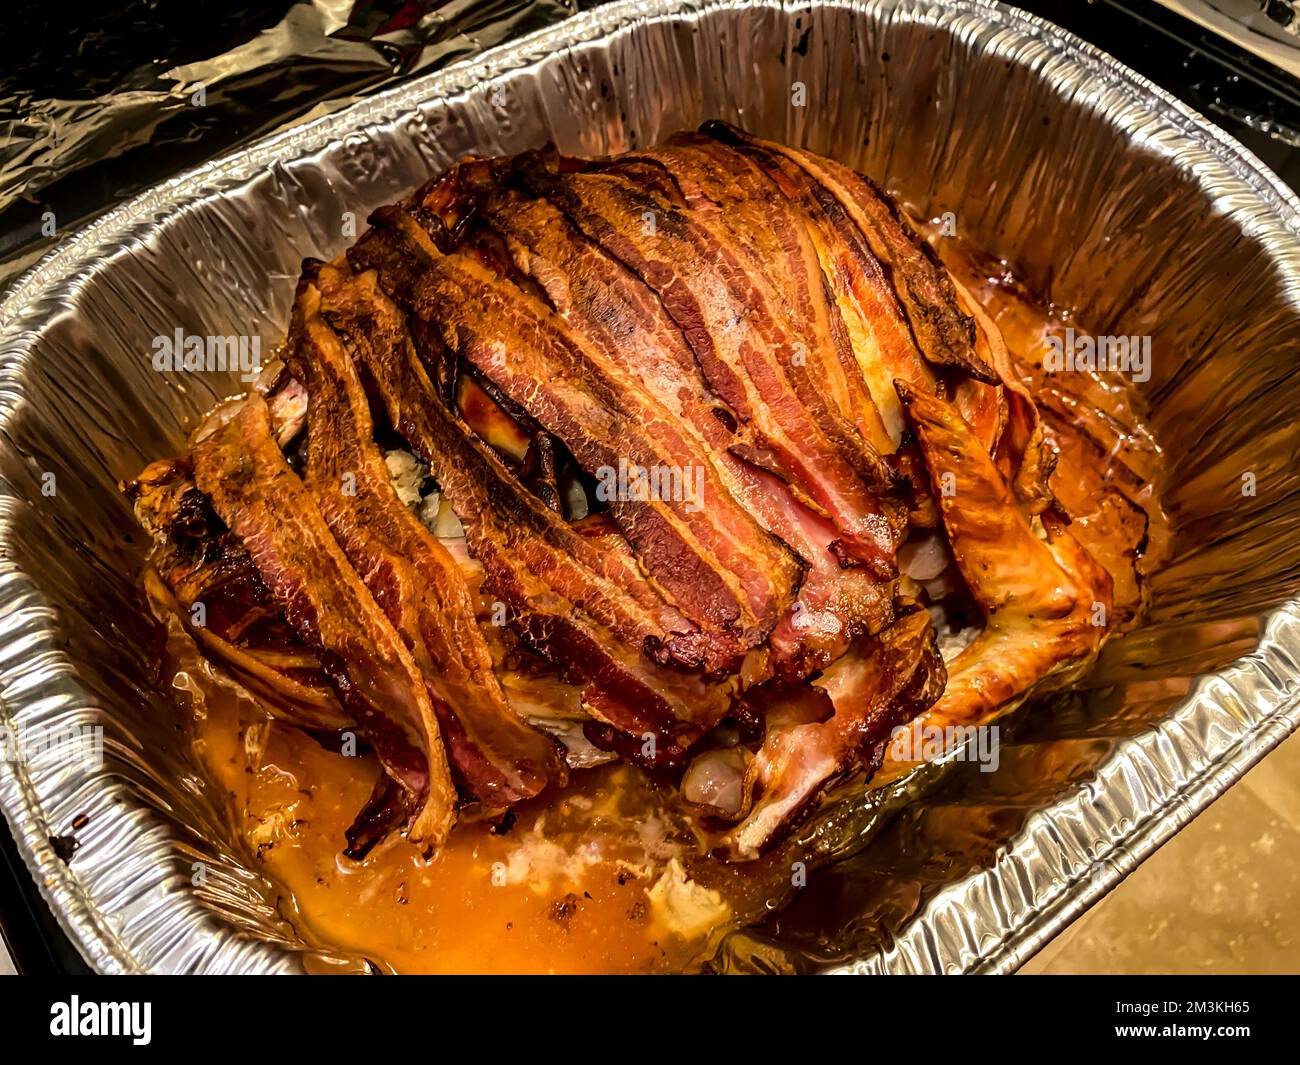 Turkey wrapped in bacon. Bacon wrapped turkey for Thanksgiving in  an aluminum plate. Stock Photo